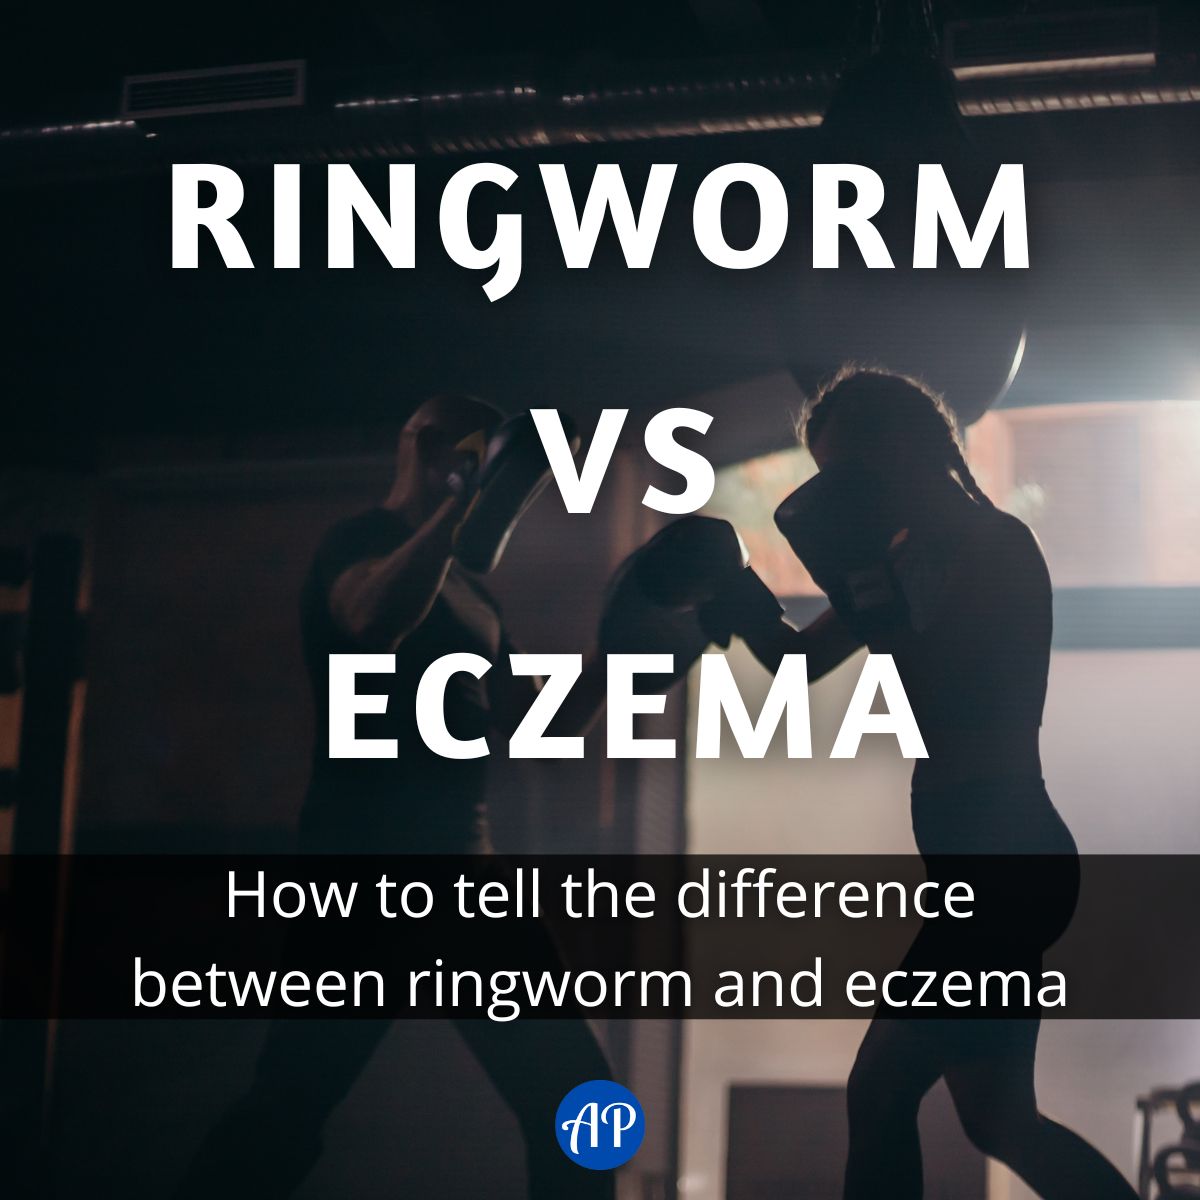 Ringworm vs Eczema: Facts You Need To Know